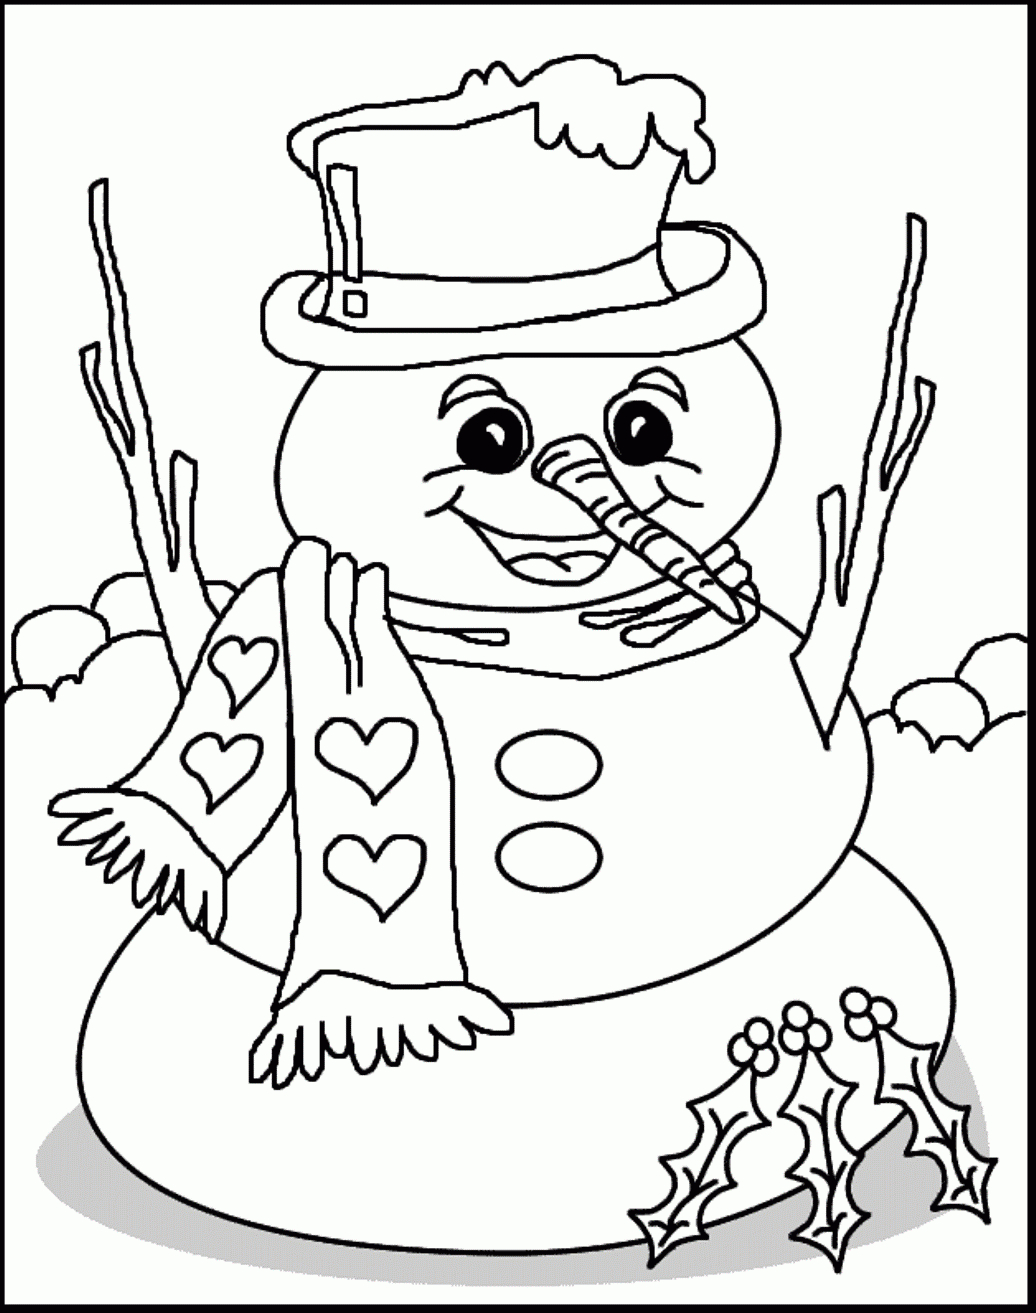 Printable Winter Coloring Pages 9 #41392 - Free Printable Winter Coloring Pages